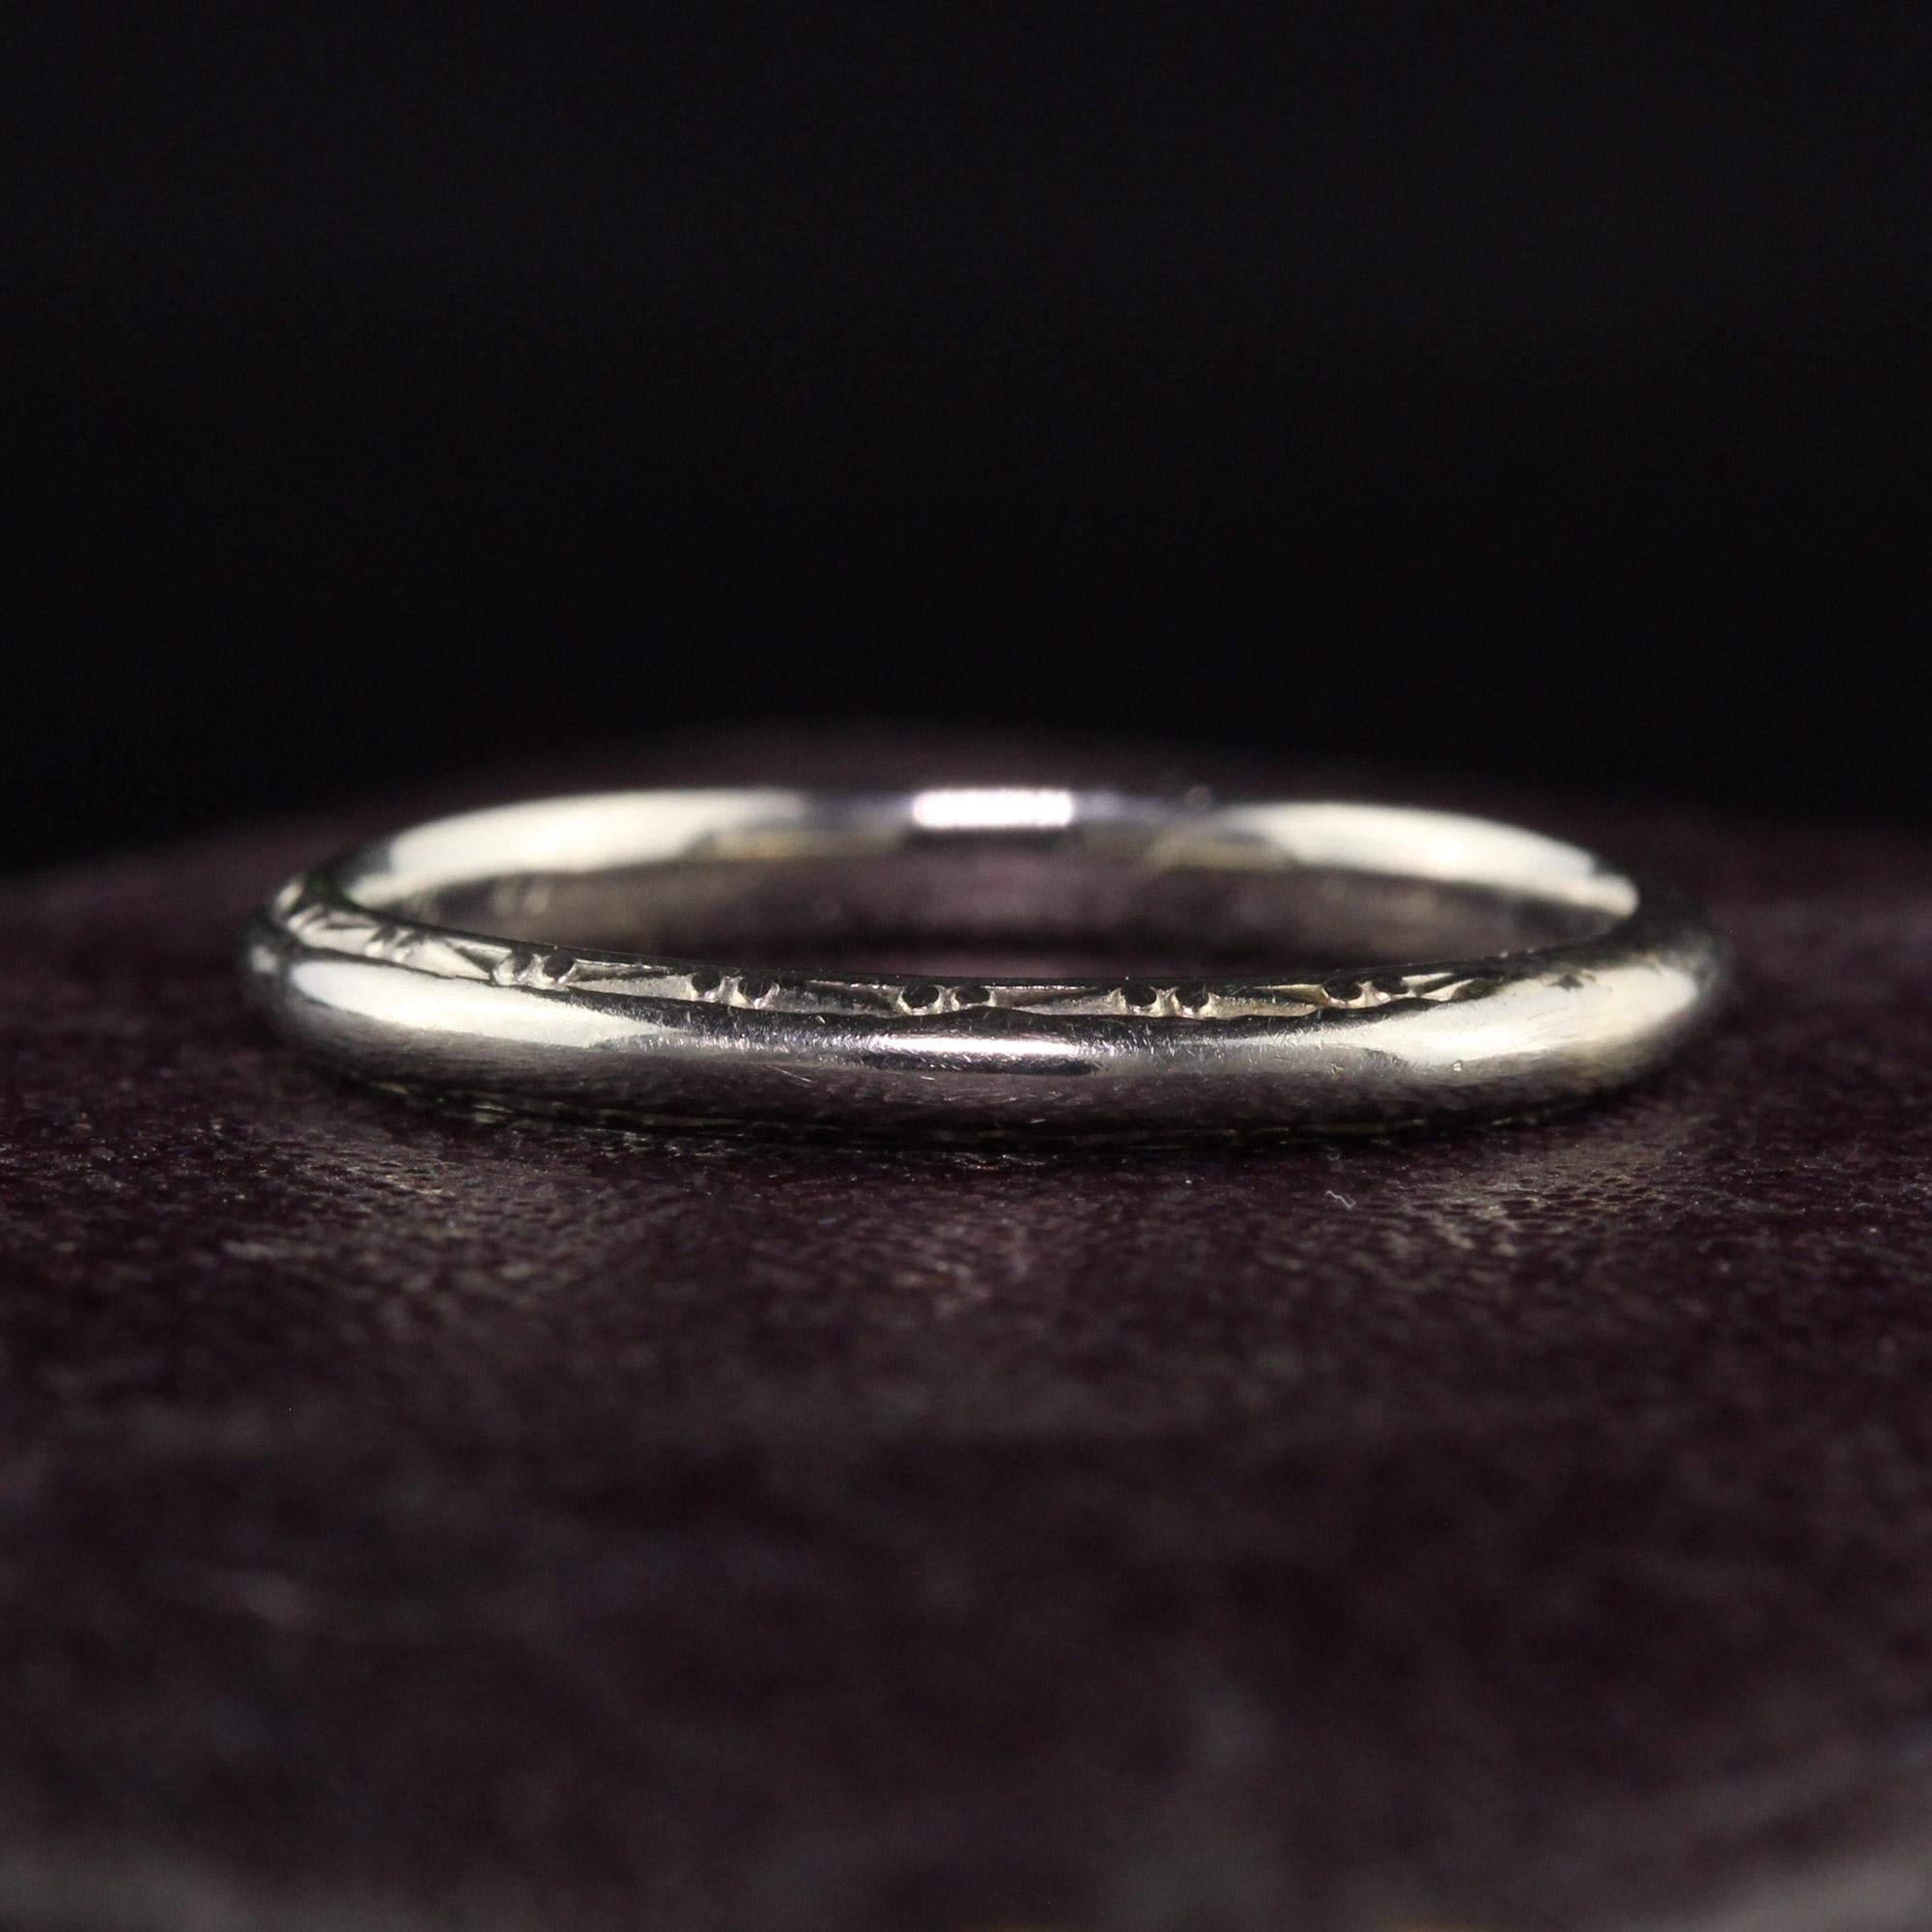 Beautiful Antique Art Deco 18K White Gold Lohengrin Engraved Wedding Band. This classic wedding band is crafted in 18k white gold and made by Lohengrin. The sides of the band are nicely engraved going all the way around.

Item #R1262

Metal: 18K